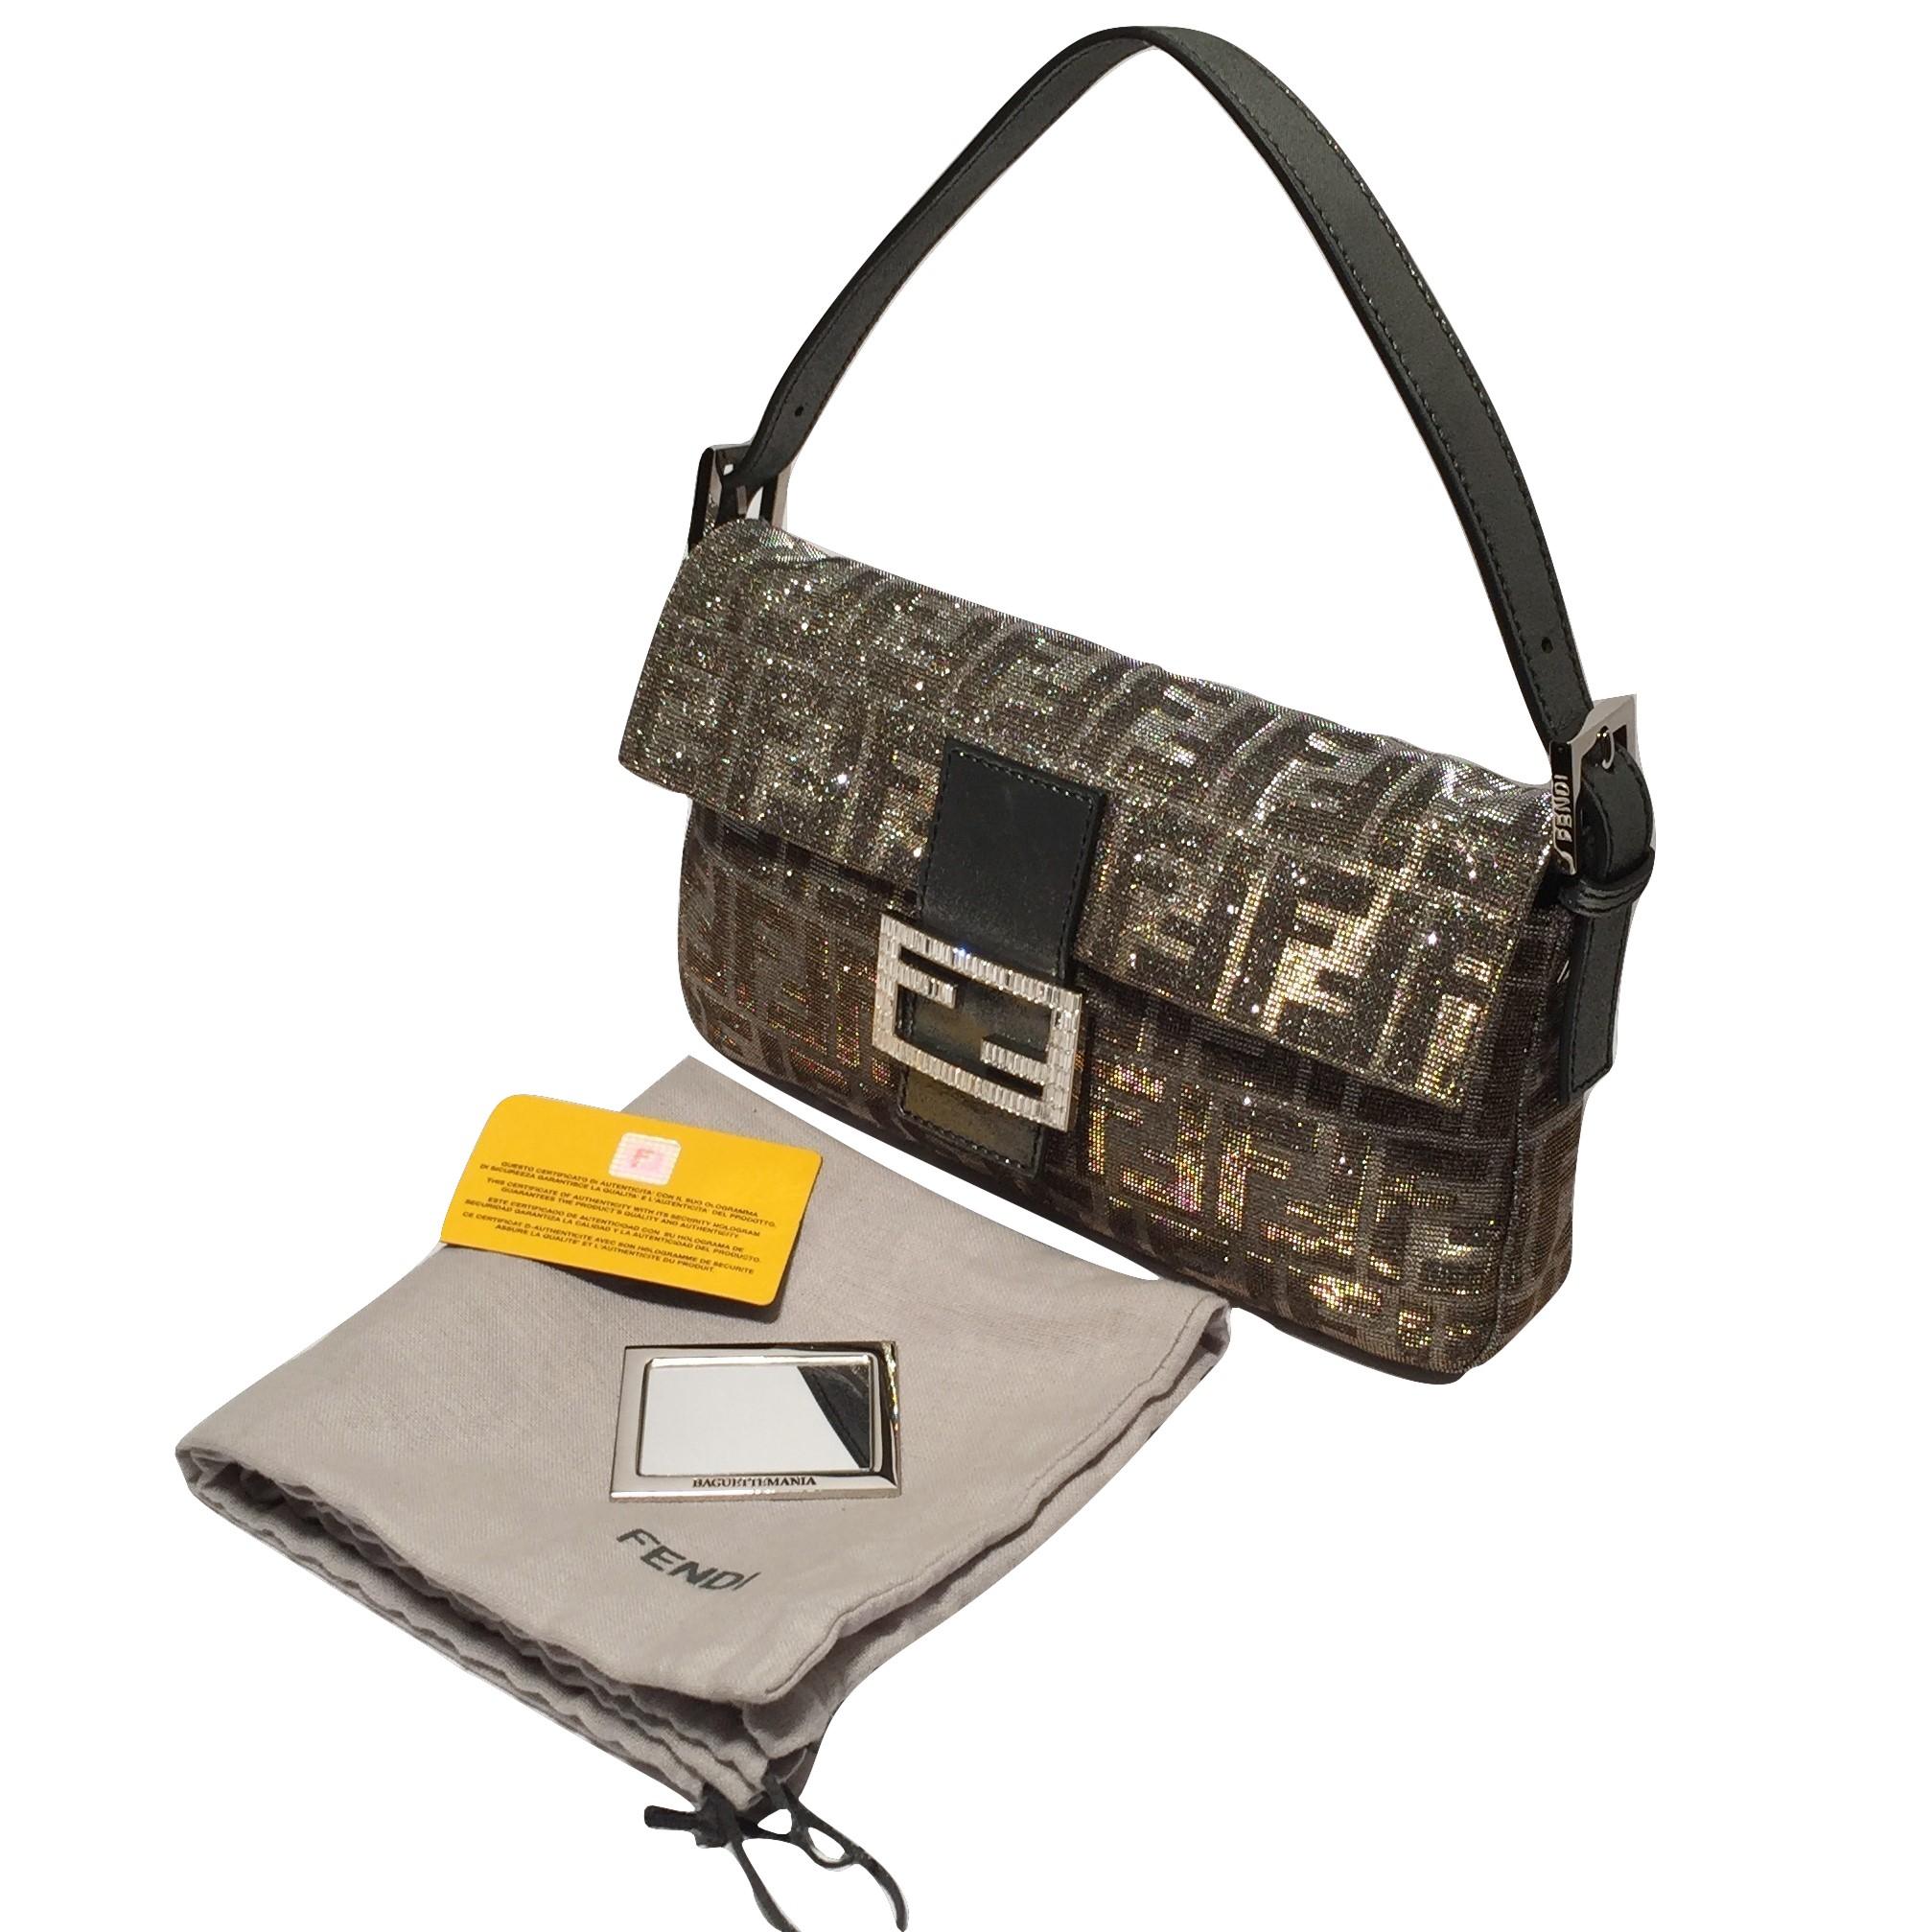 New Fendi Collectors Crystal Baguette Bag Featured in the 15th Anniversary Book 5